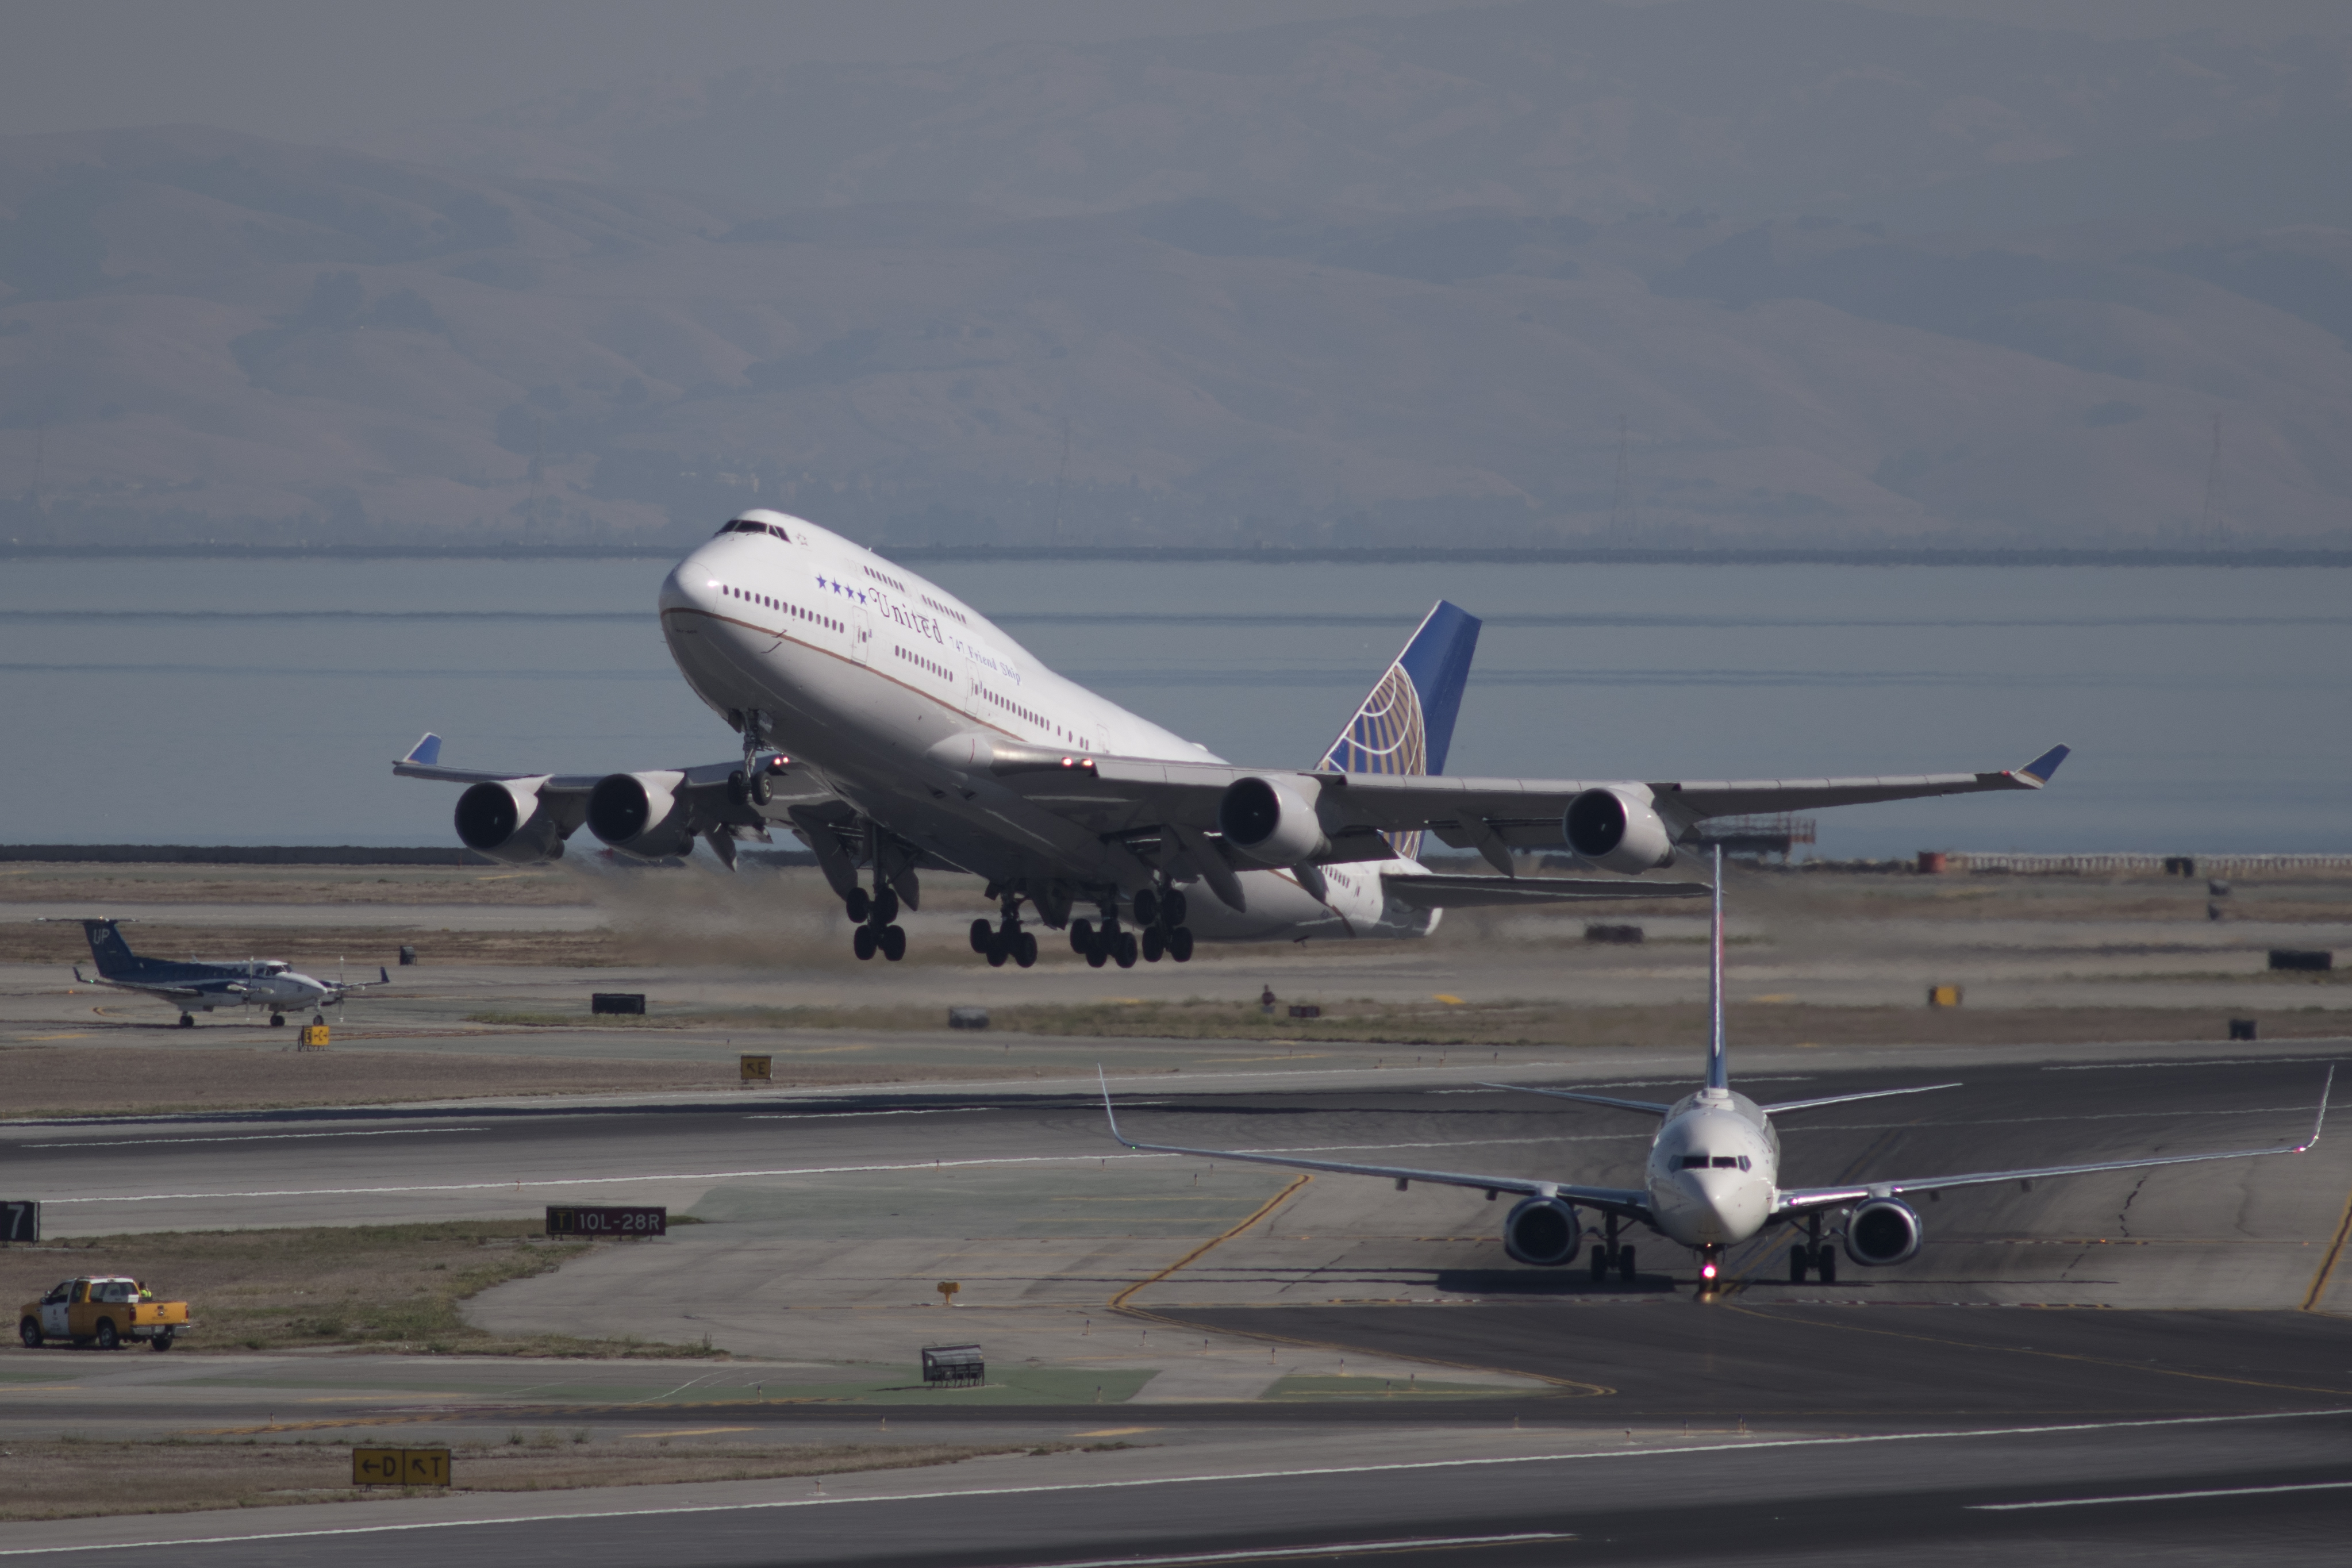 United Airlines' Boeing 747-400 aircraft performed its last passenger flight on November 7, 2017, from San Francisco to Hawaii. (NurPhoto—NurPhoto via Getty Images)